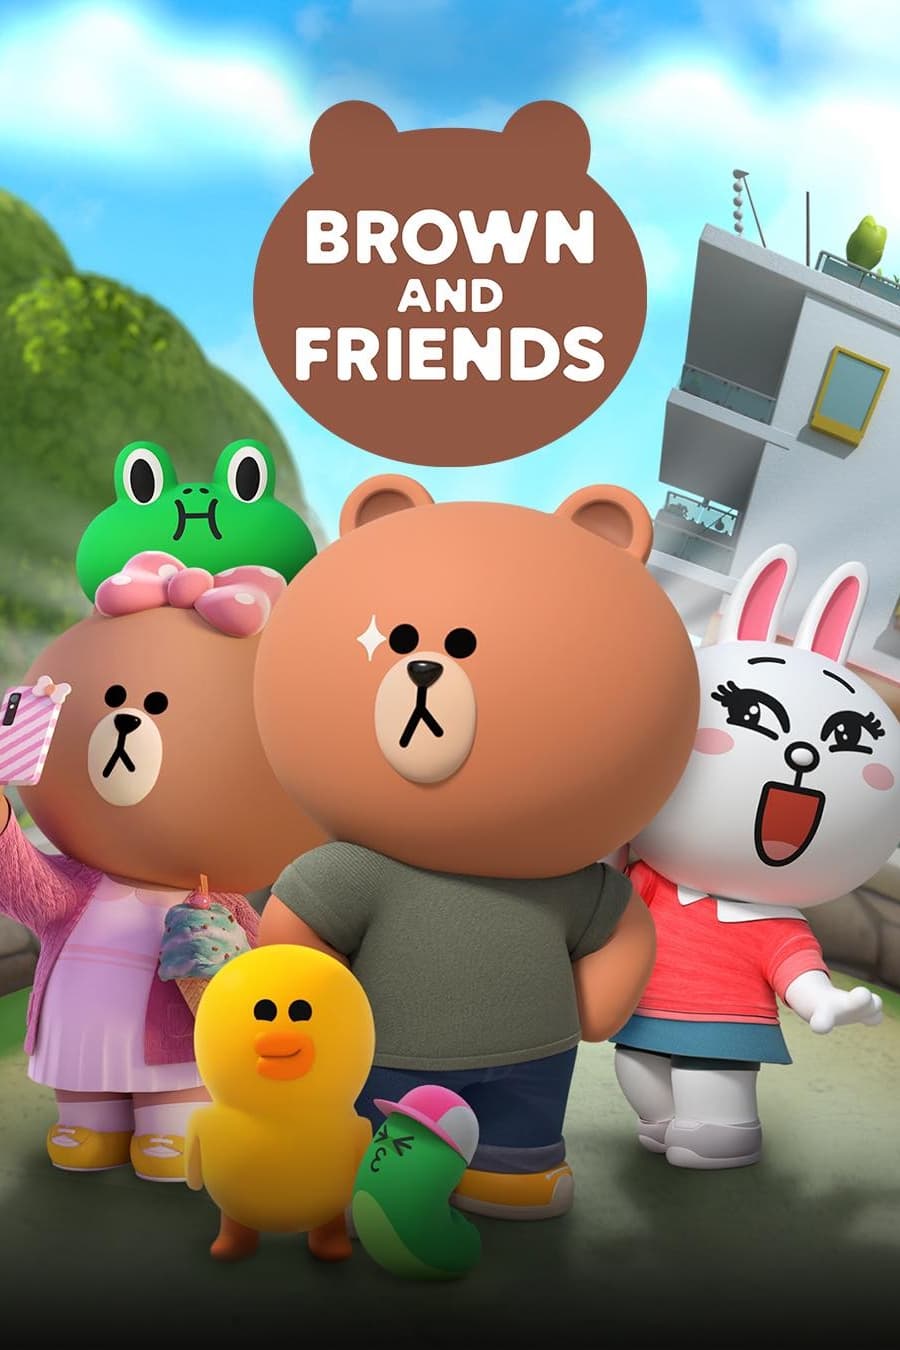 Brown and Friends TV Shows About Ship